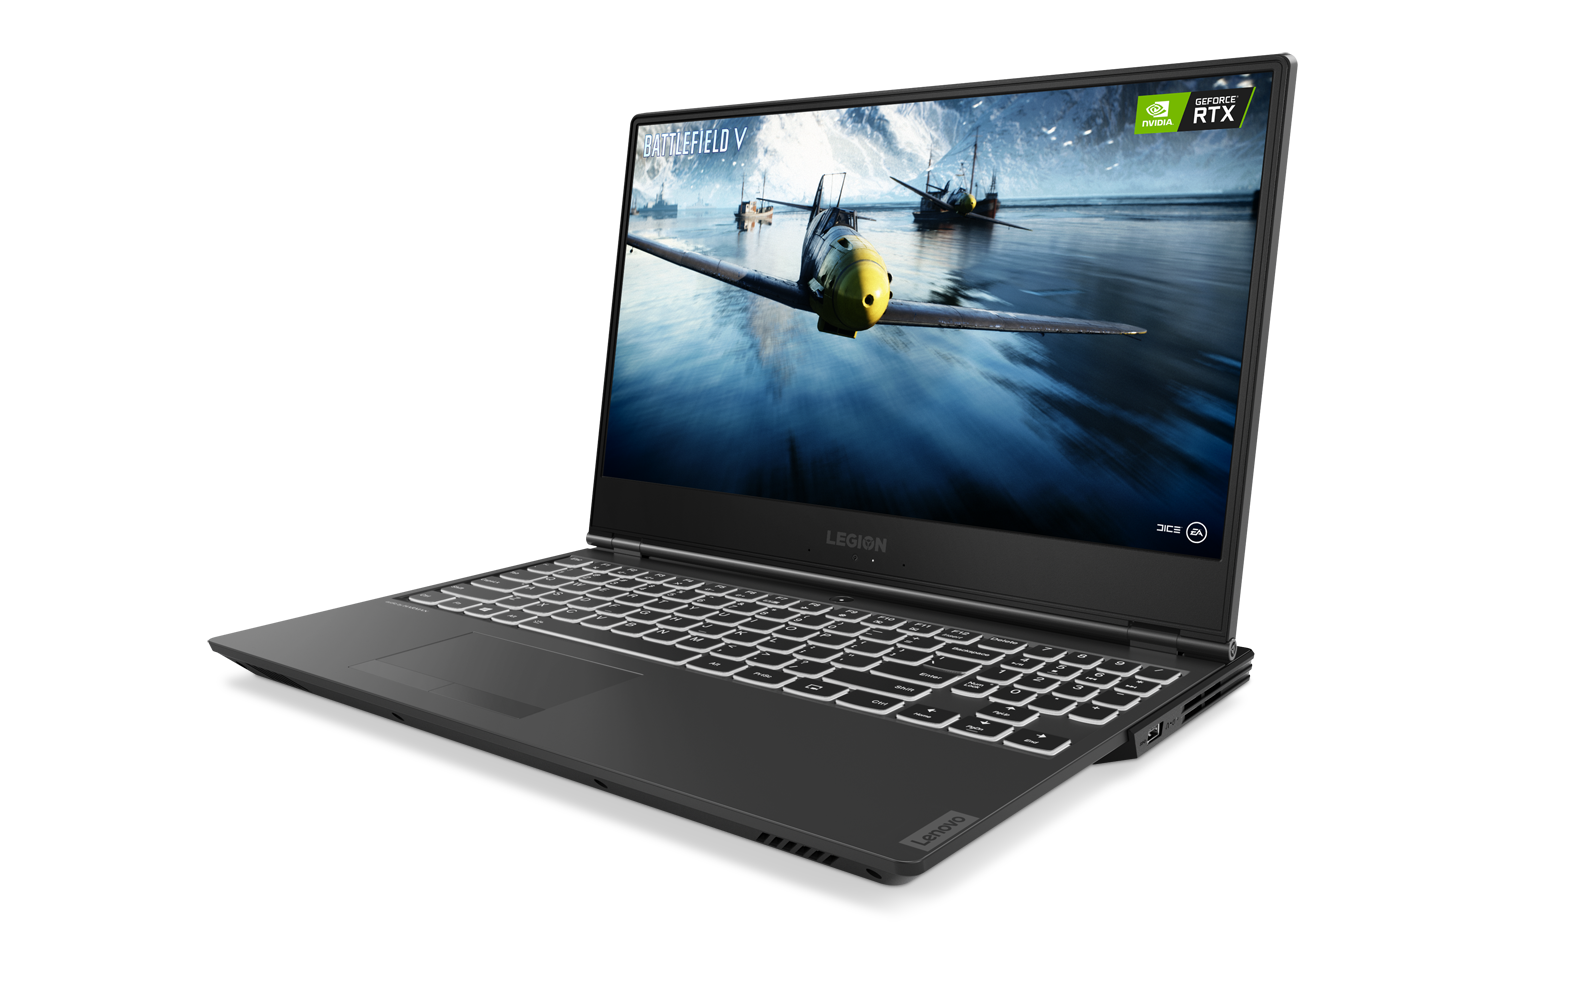 Nvidia promises RTX 2060 laptops for $999, this is what we know so far ...